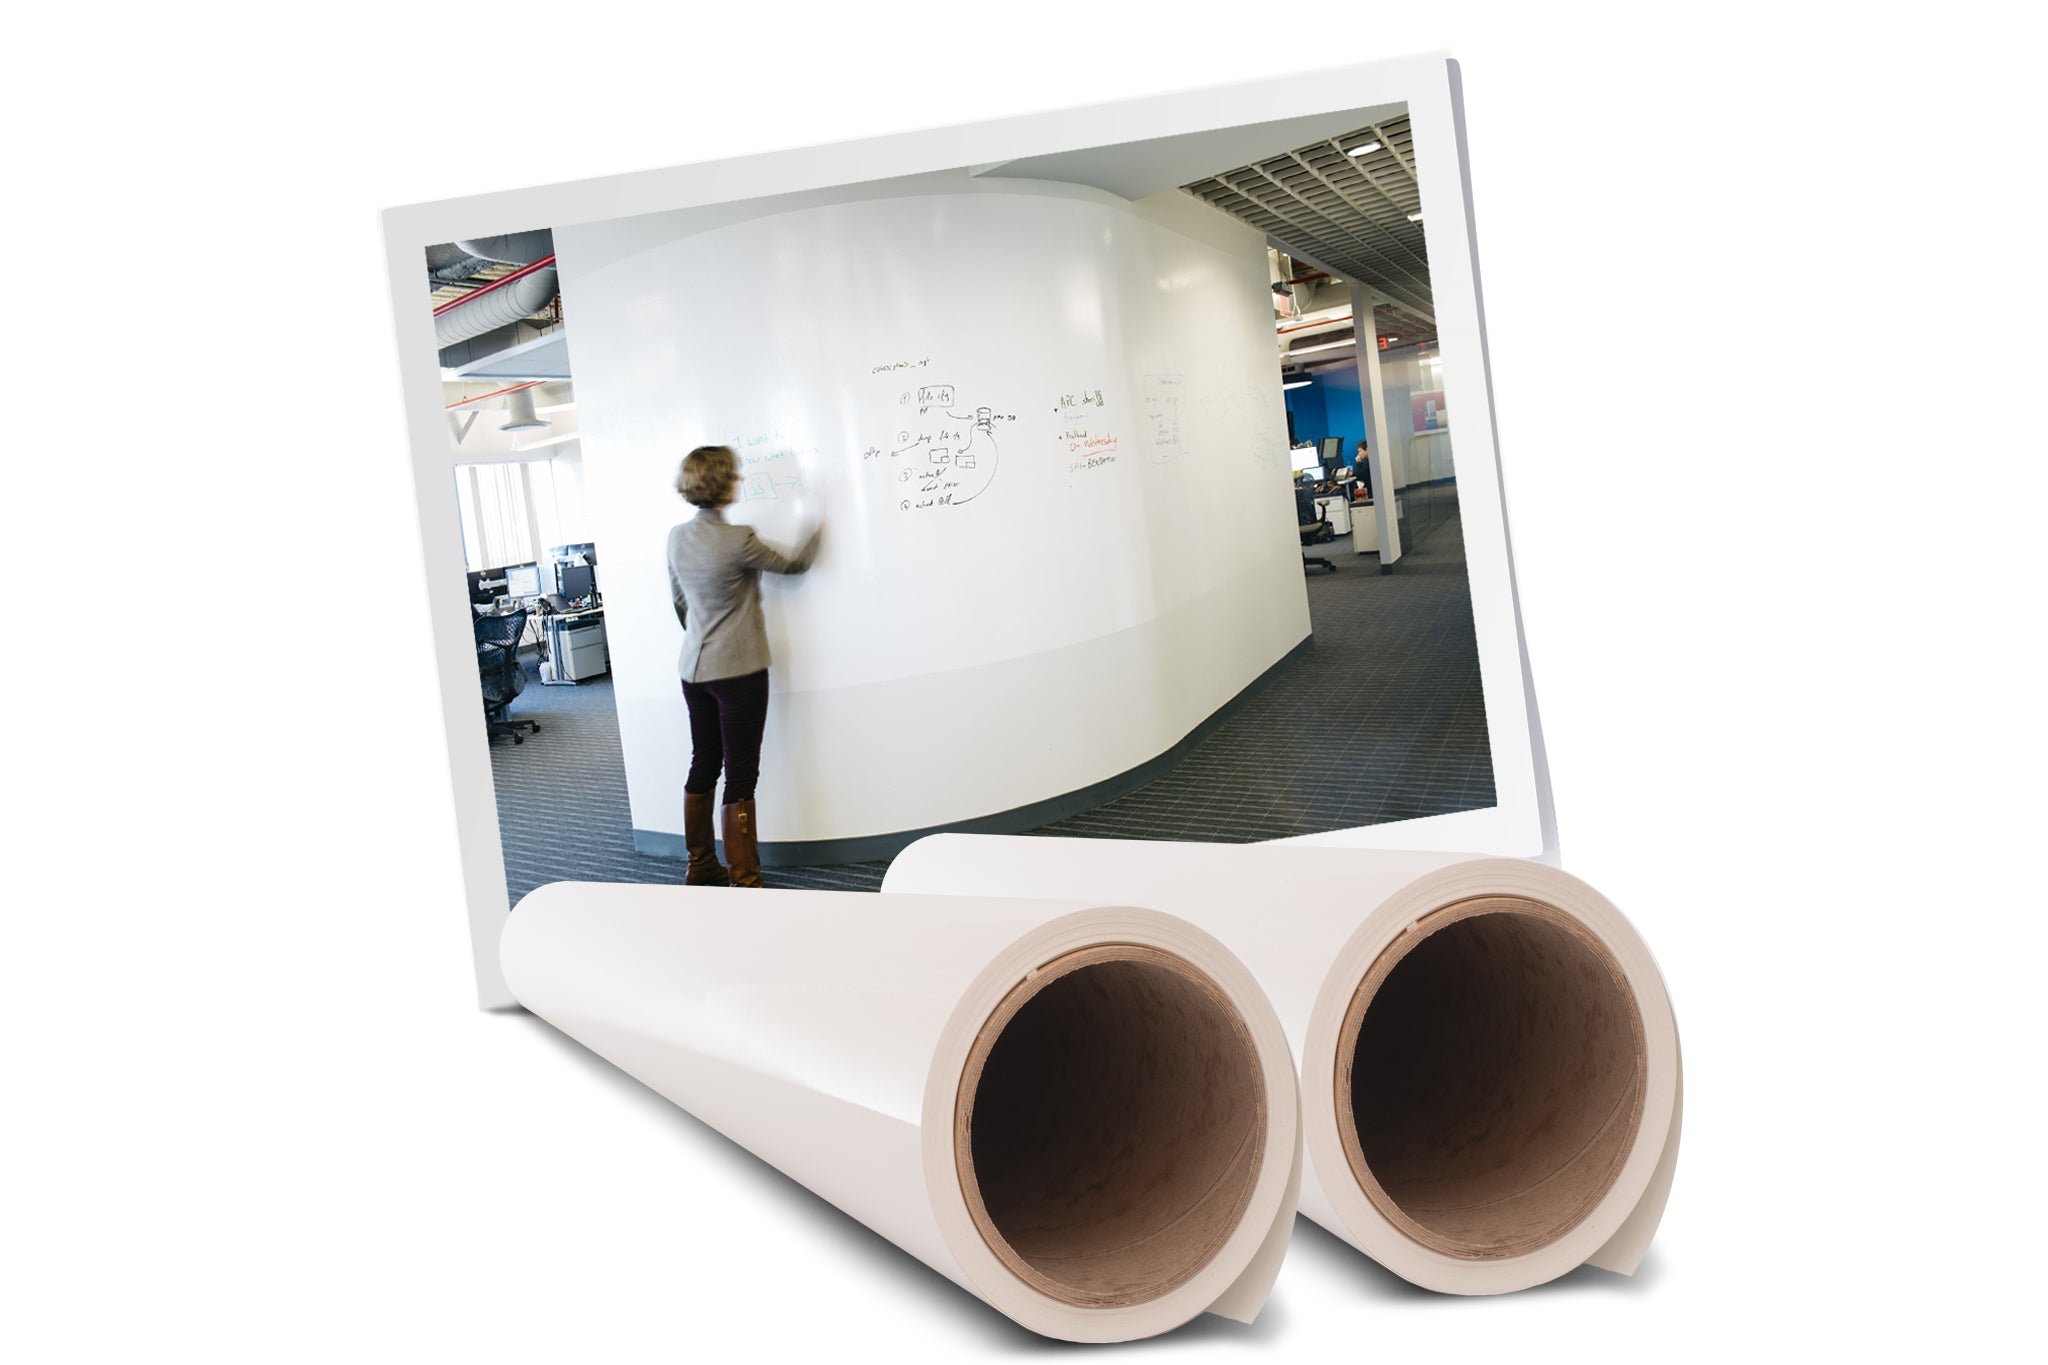 IdeaPaint Dry Erase paint for corporate workplaces - IdeaPaint US